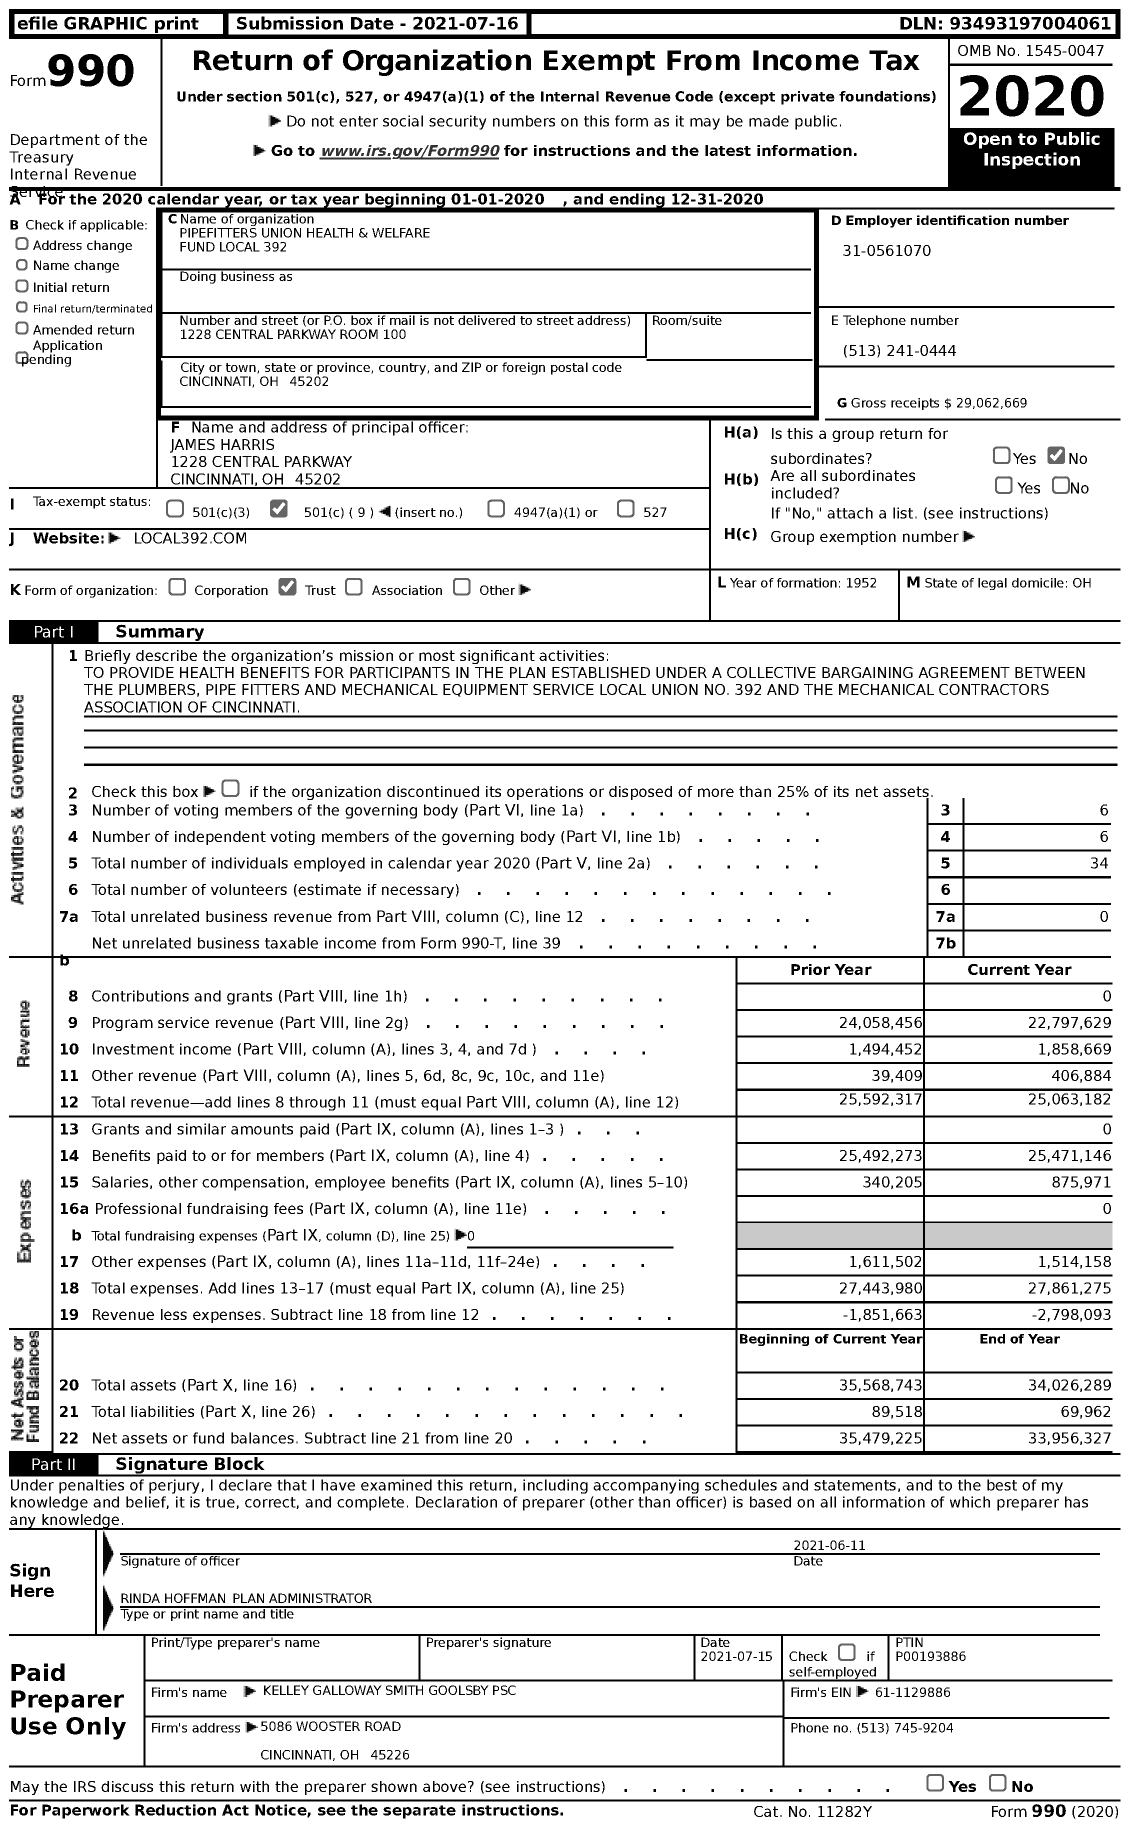 Image of first page of 2020 Form 990 for Pipefitters Union Health and Welfare Fund Local 392